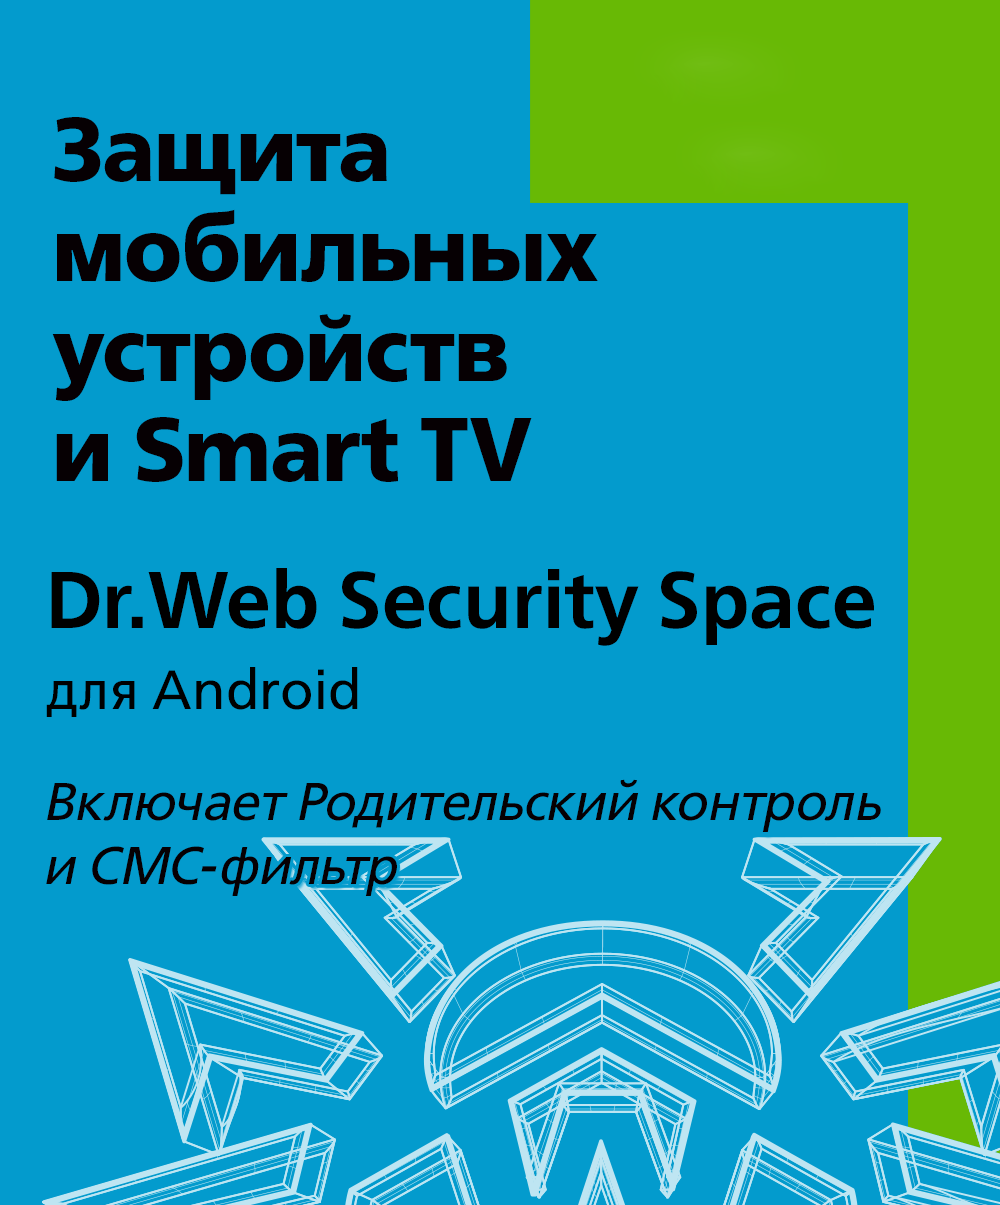 Dr.Web Security Space (for mobile devices) - for 5 devices, for 24 months, KZ